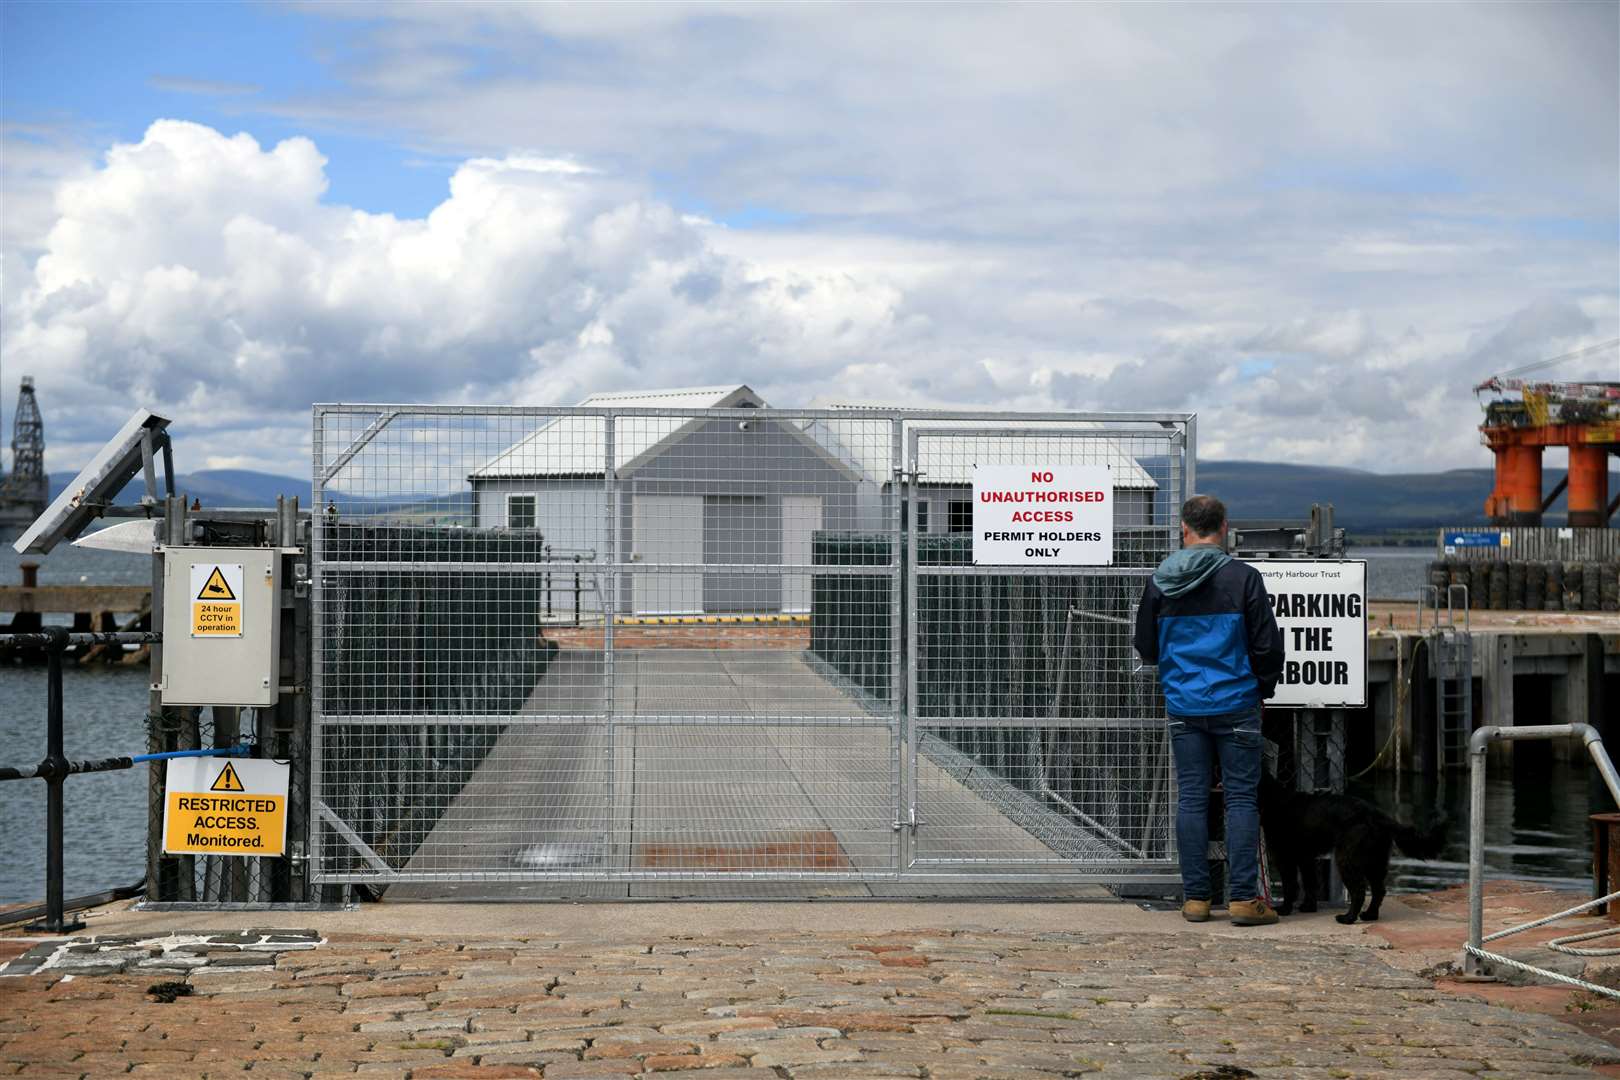 A gate has been put in place to restrict access.